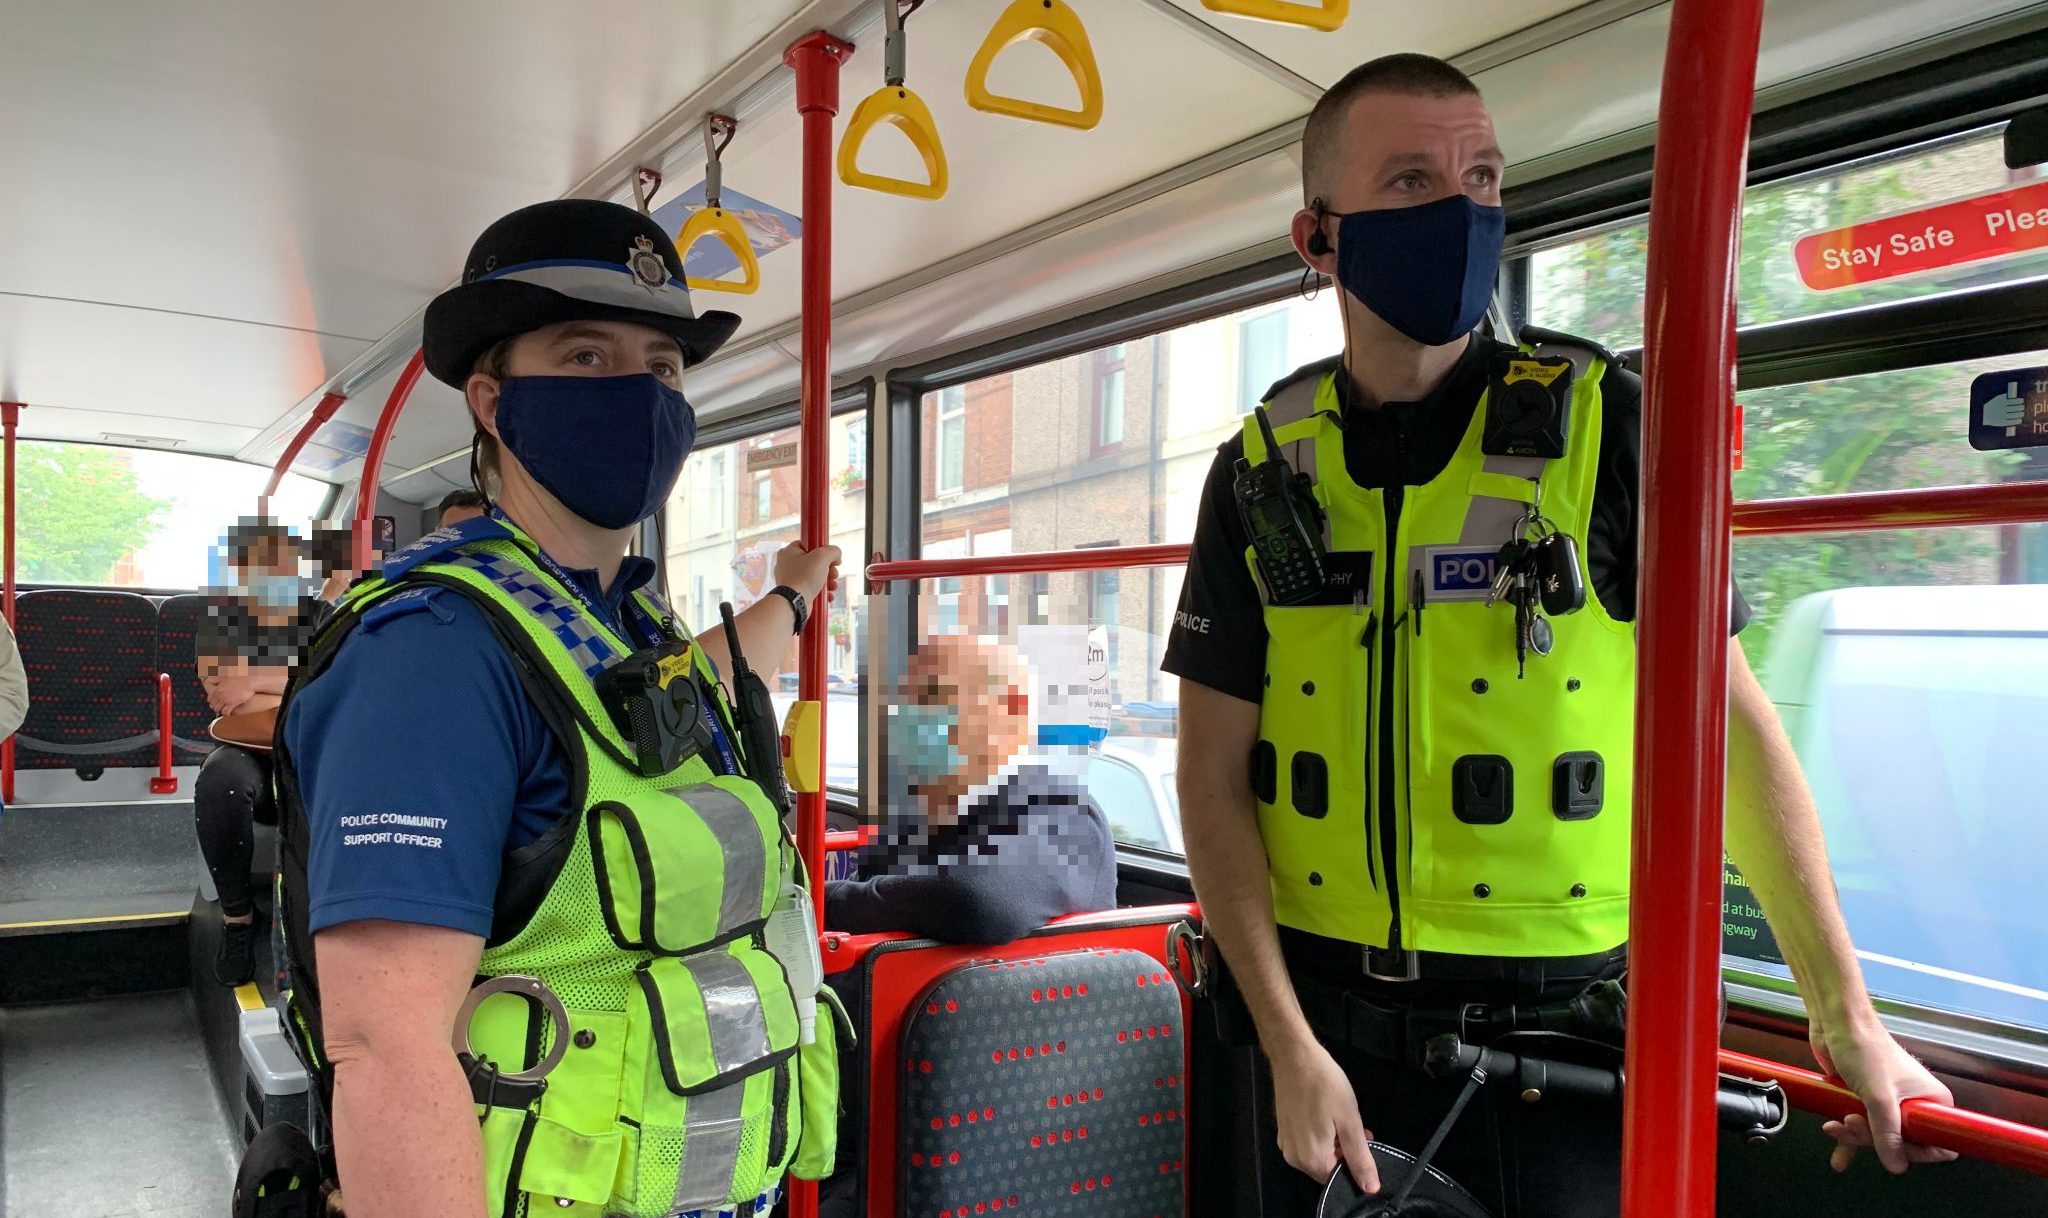 Male and female police offices on public transport wearing face masks